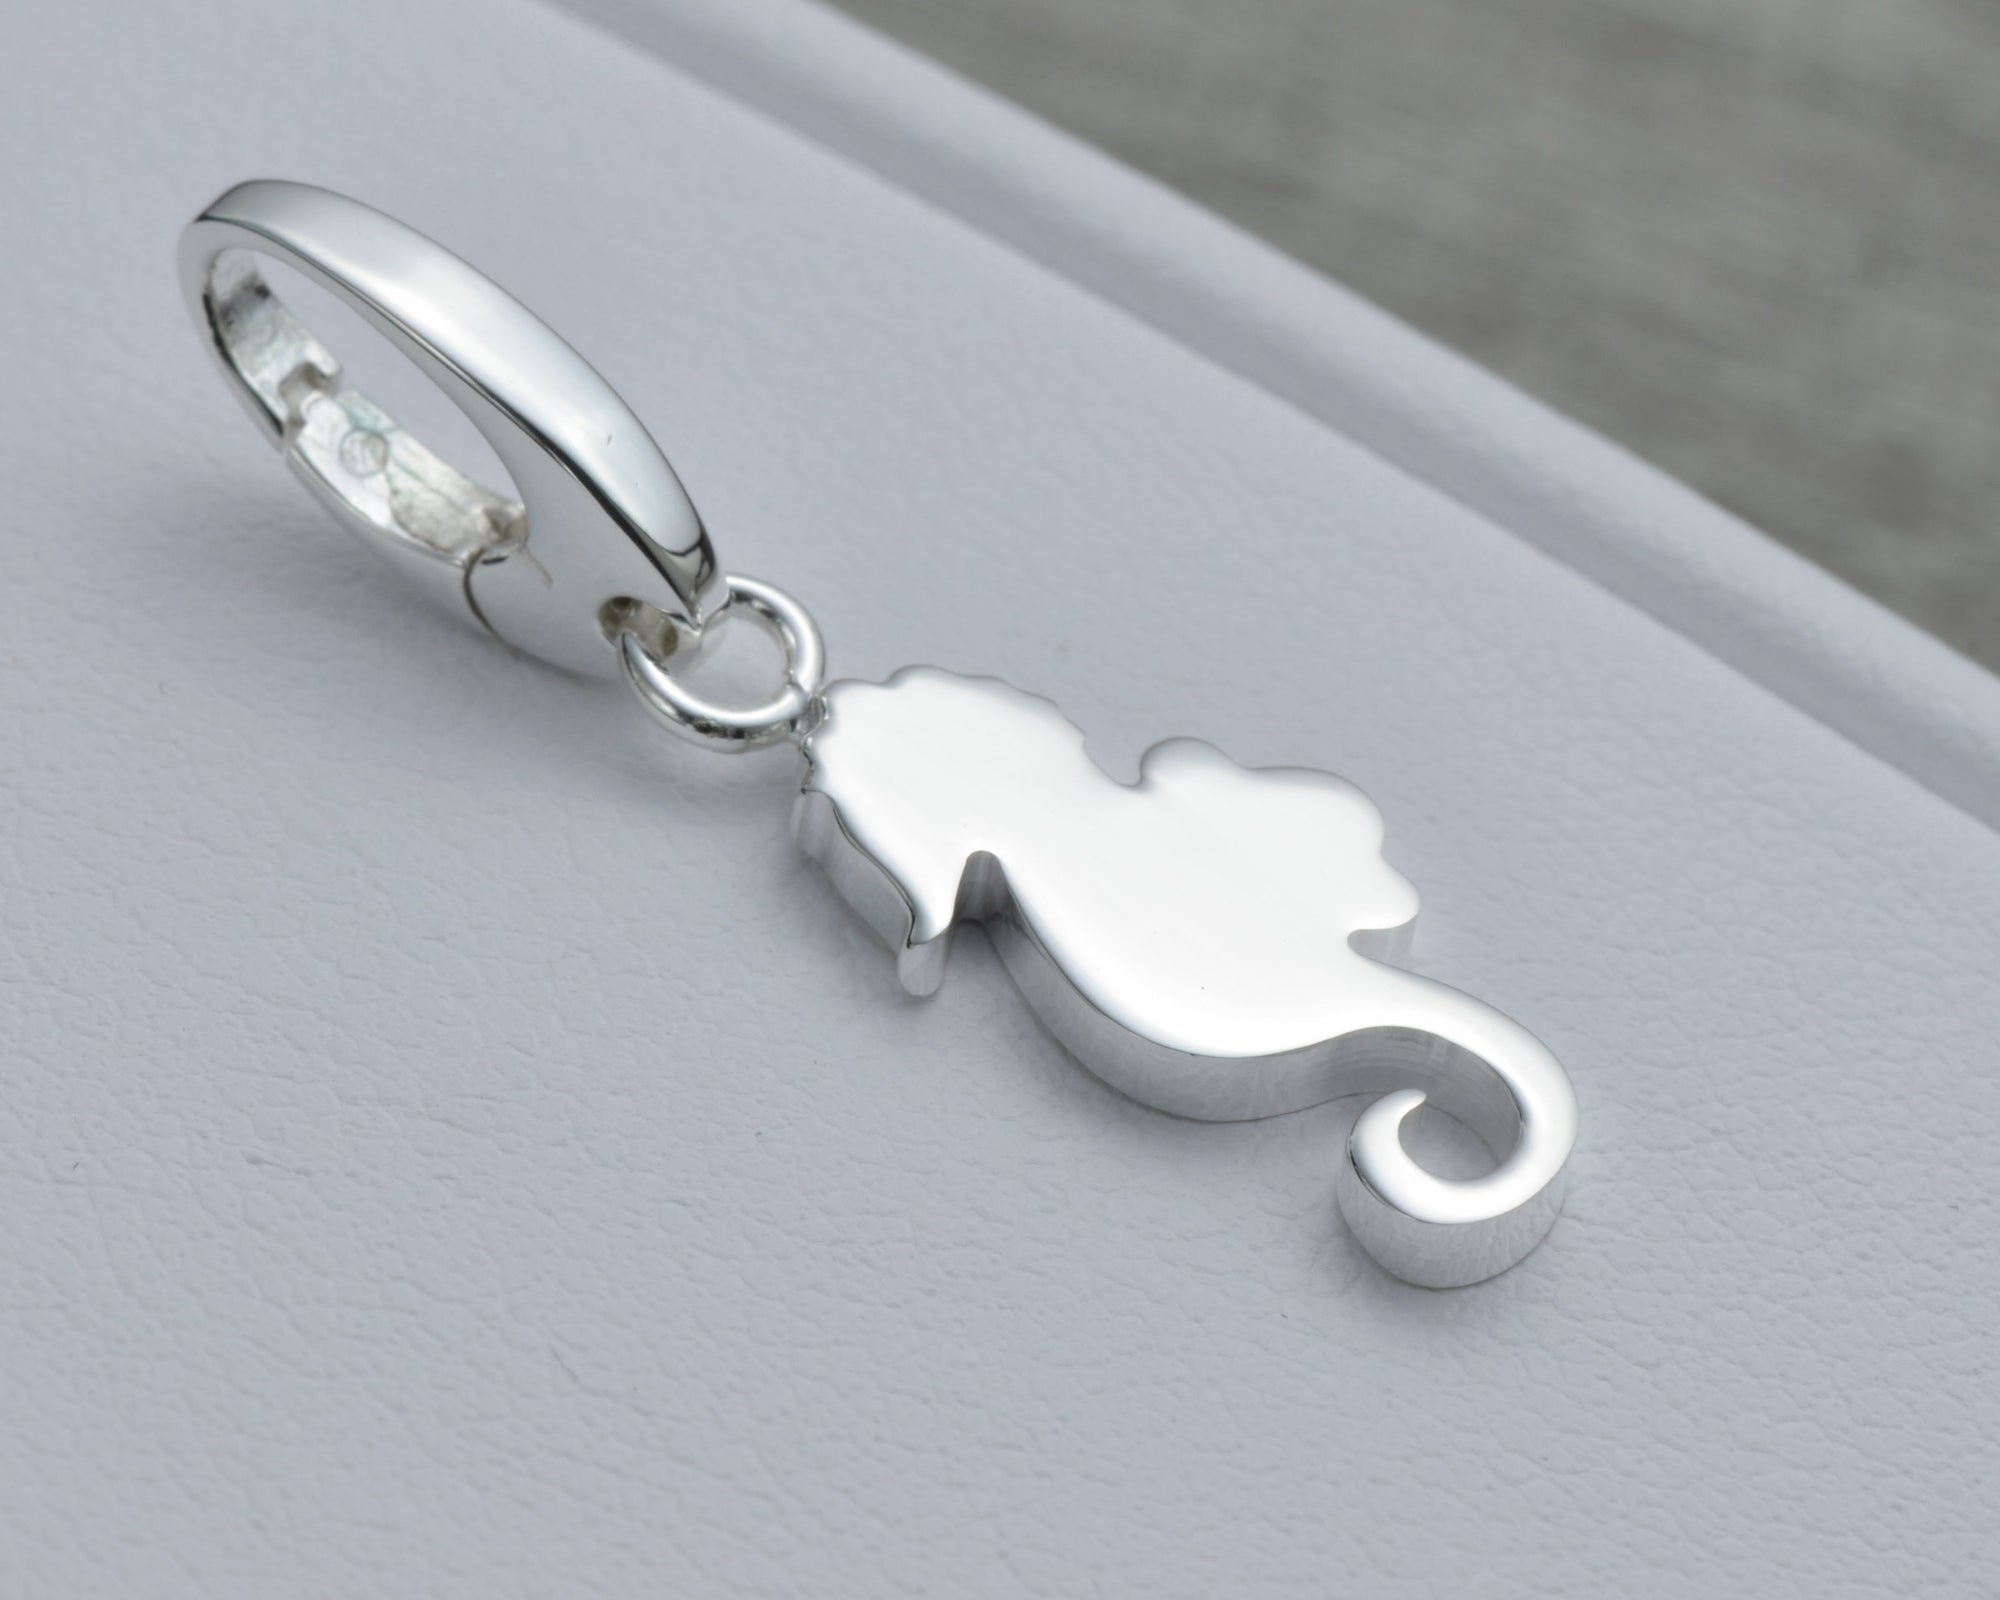 SEAHORSE CHARM IN STERLING SILVER